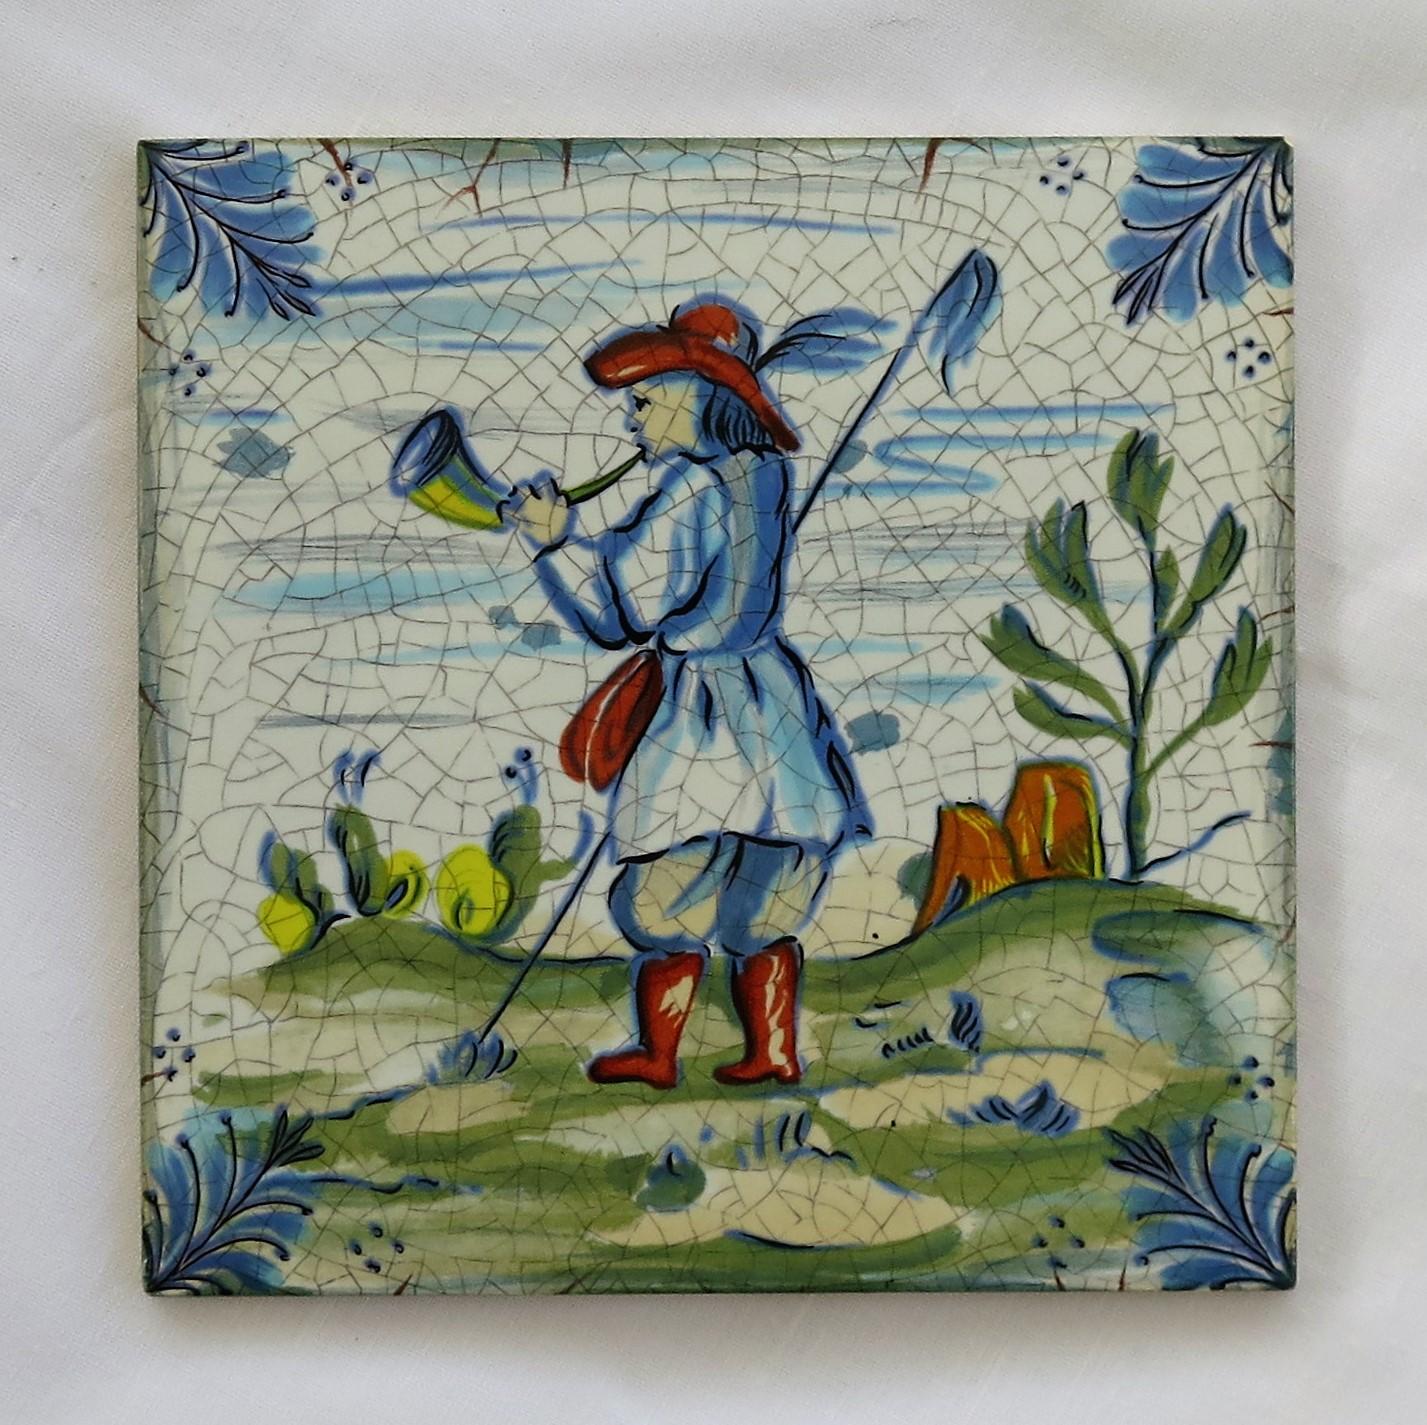 Glazed Set of Eleven Ceramic Wall Tiles Square by Servais of Germany Set 4, circa 1950